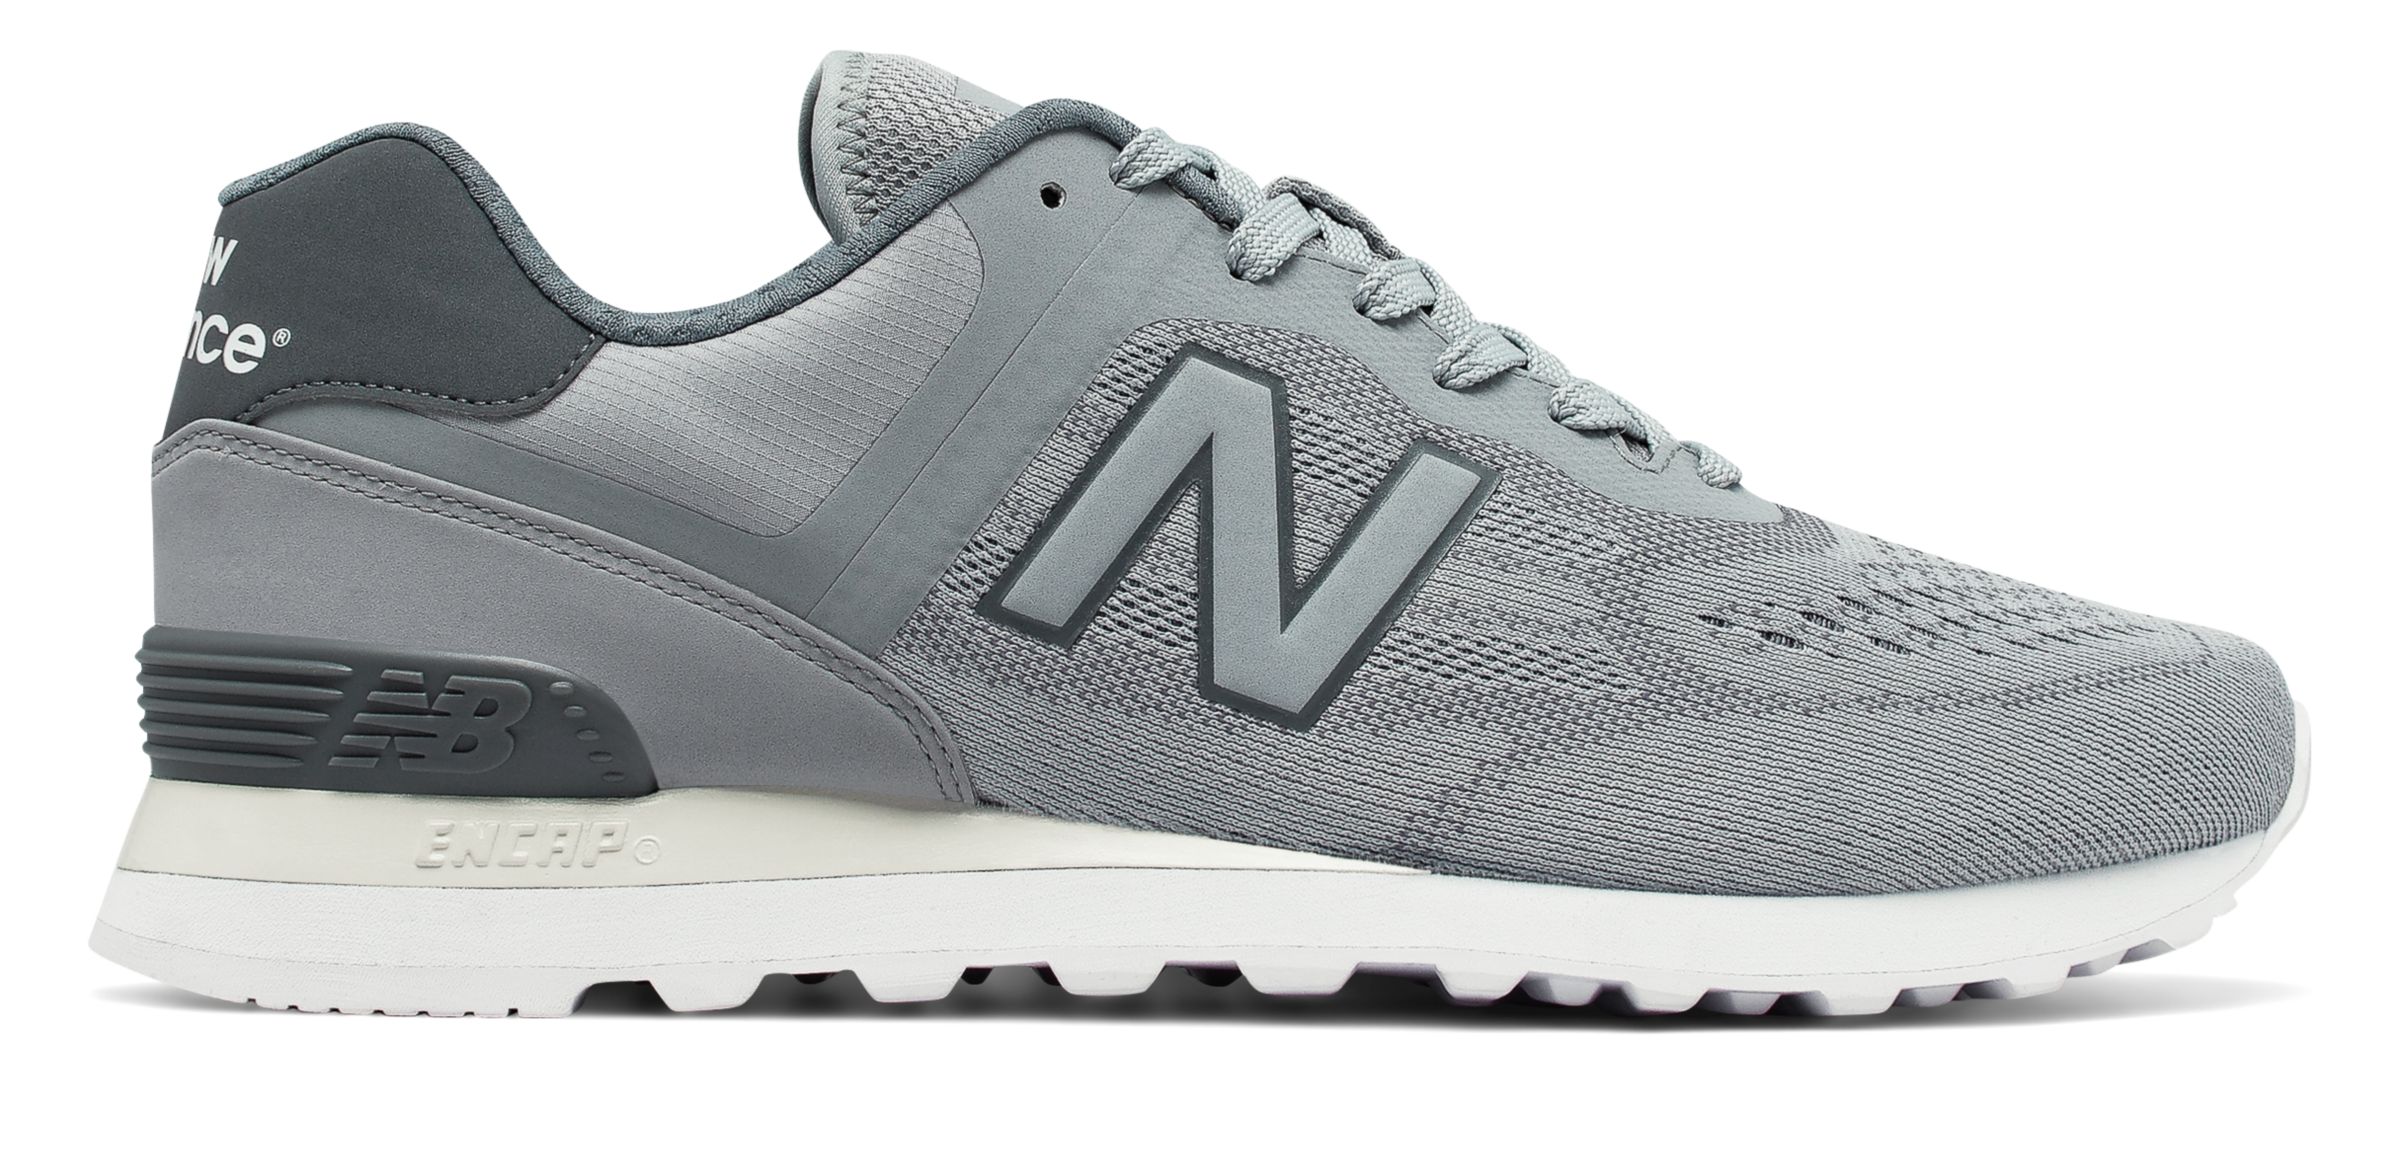 New Balance Shoes in Spring Pastels are here! - Balance & Blessings